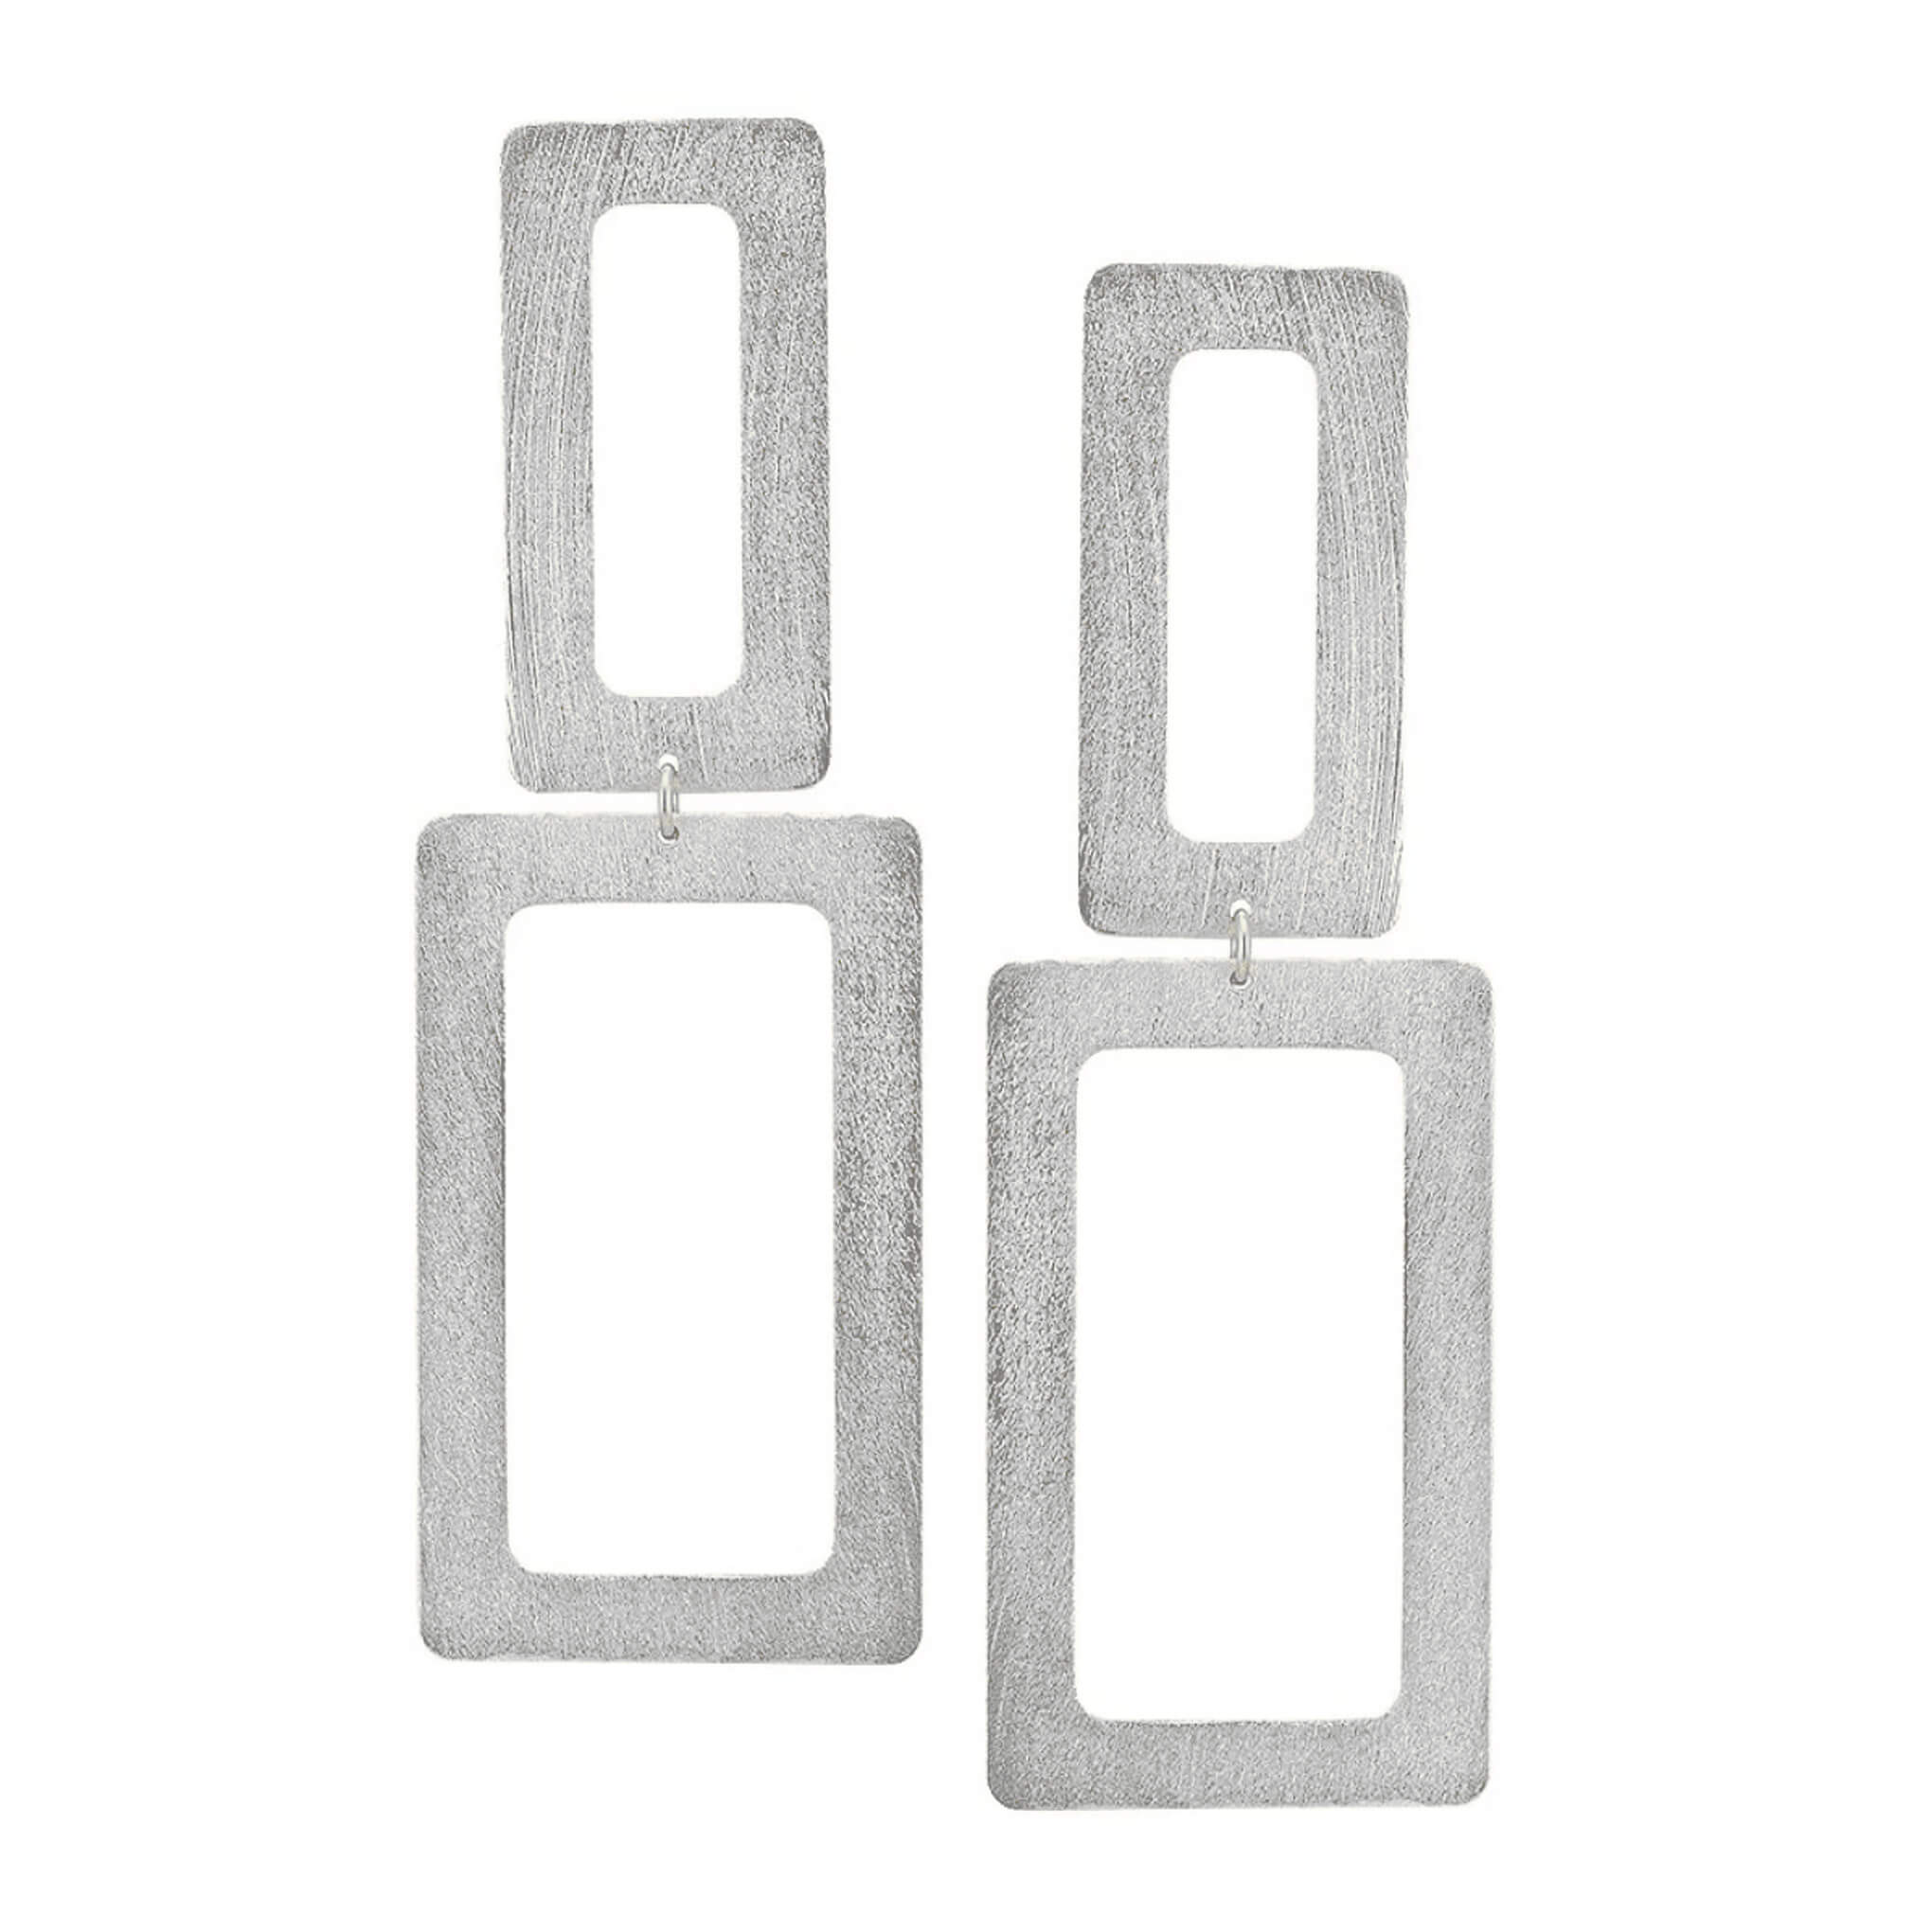 primary image of Sheila Fajl Double Open Rectangle Statement Earrings in Silver Plated